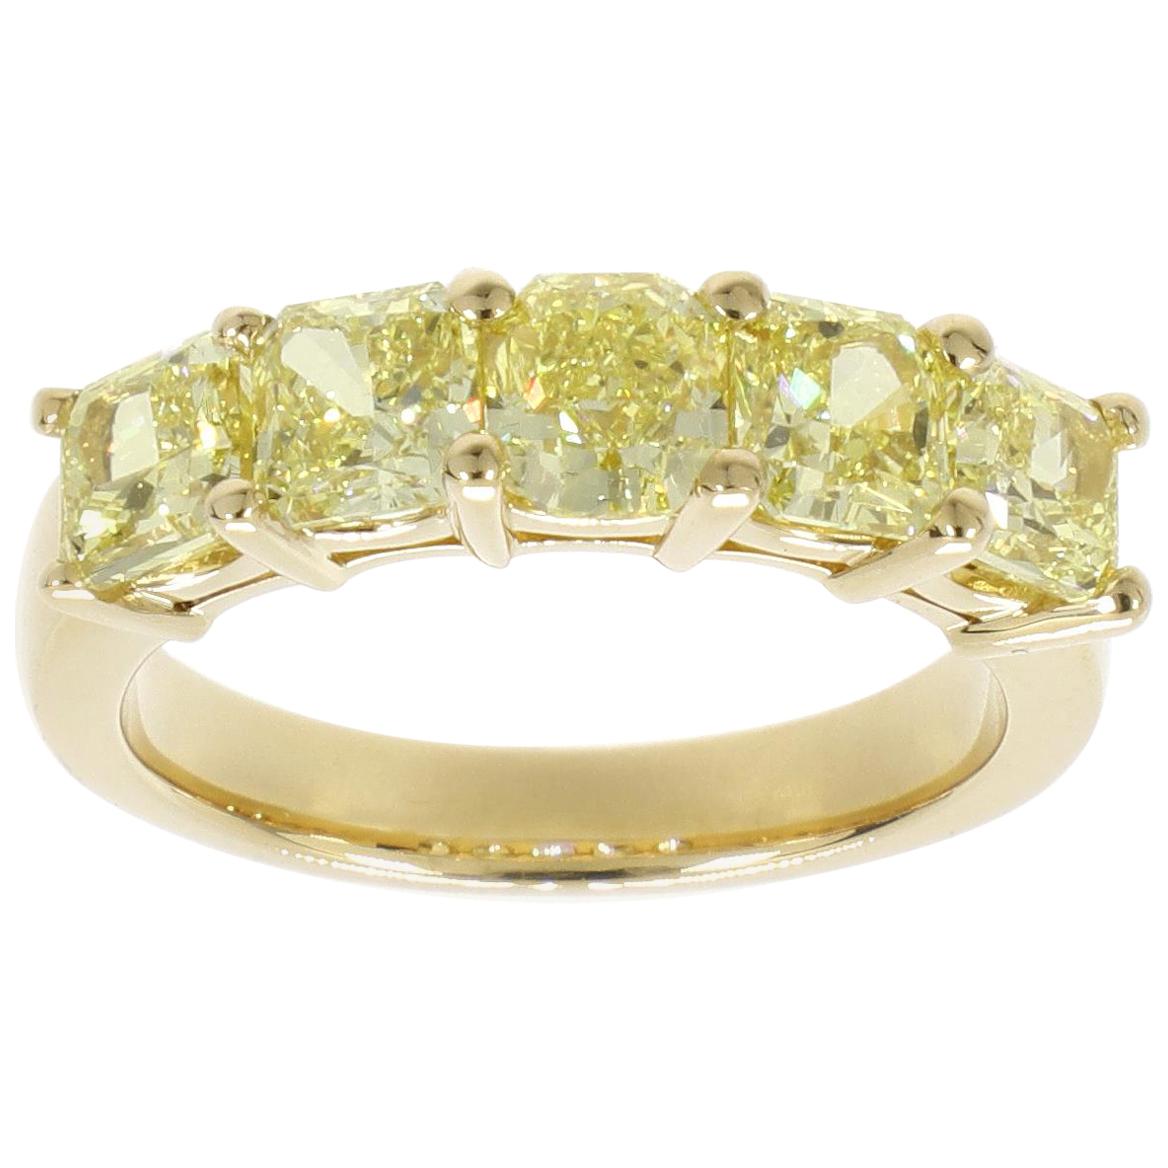 3.14 Carat Yellow Diamond Yellow Gold Eternity Band Ring For Sale